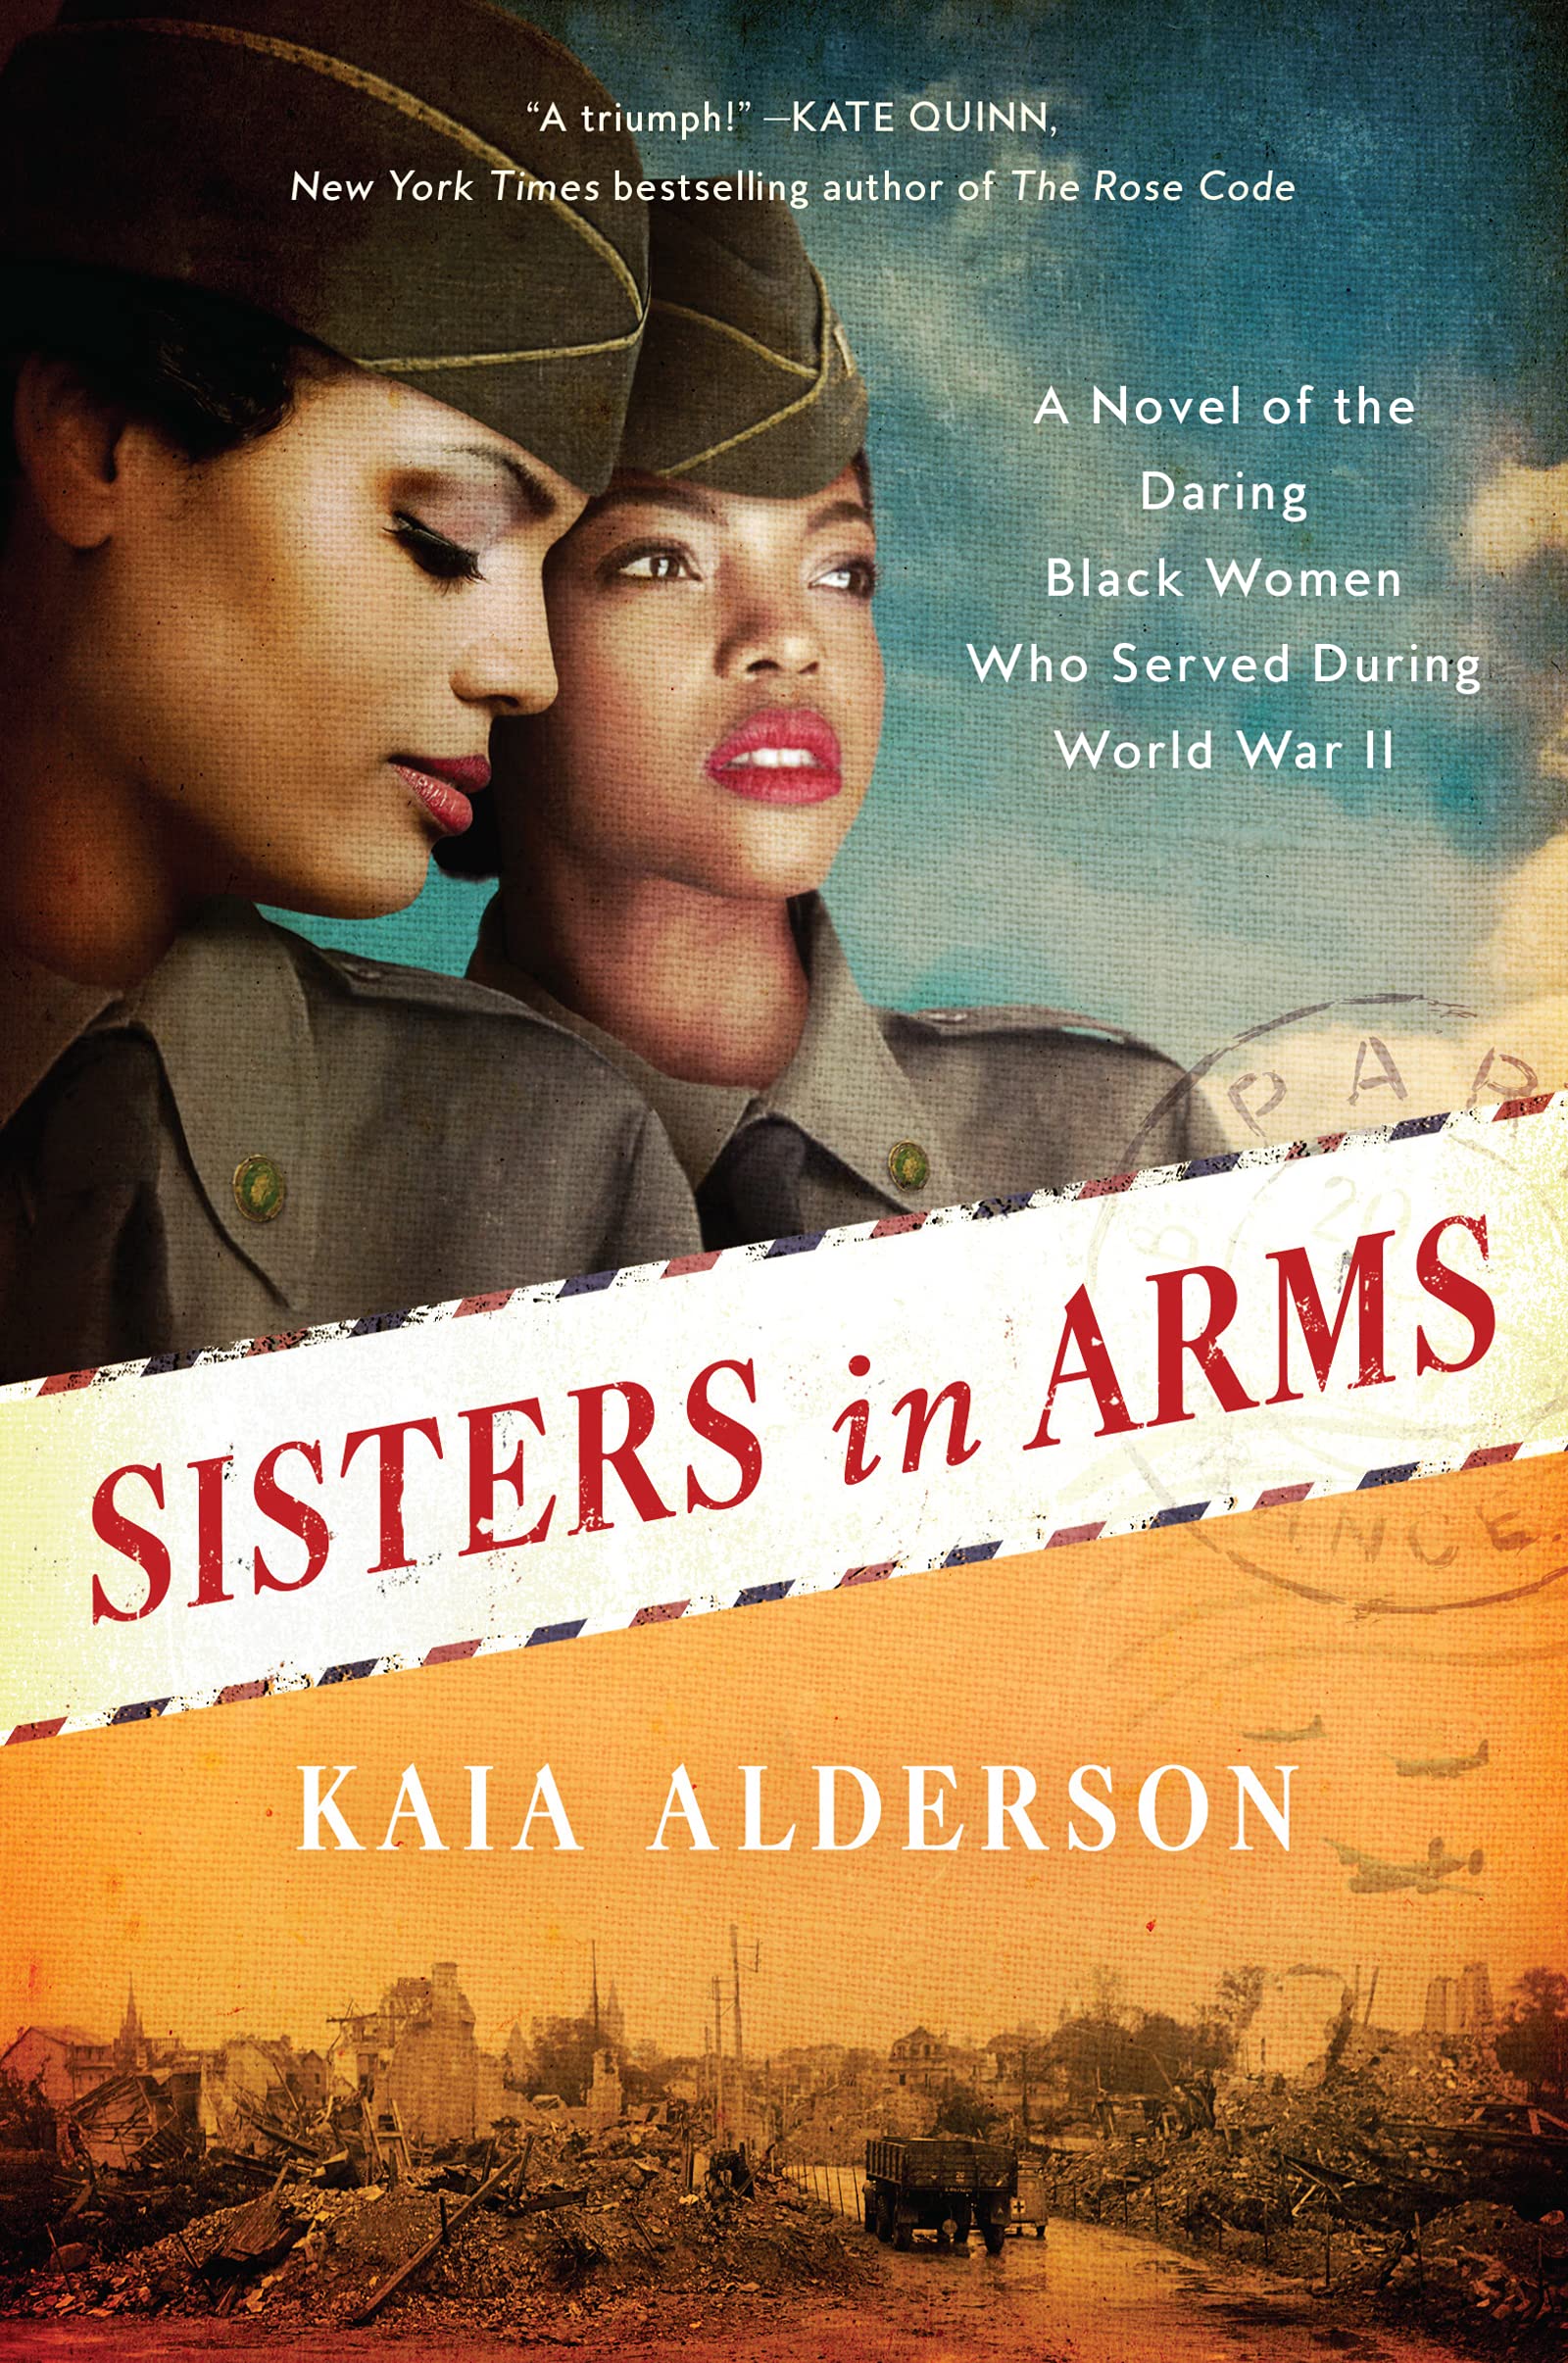 Image for "Sisters in Arms"